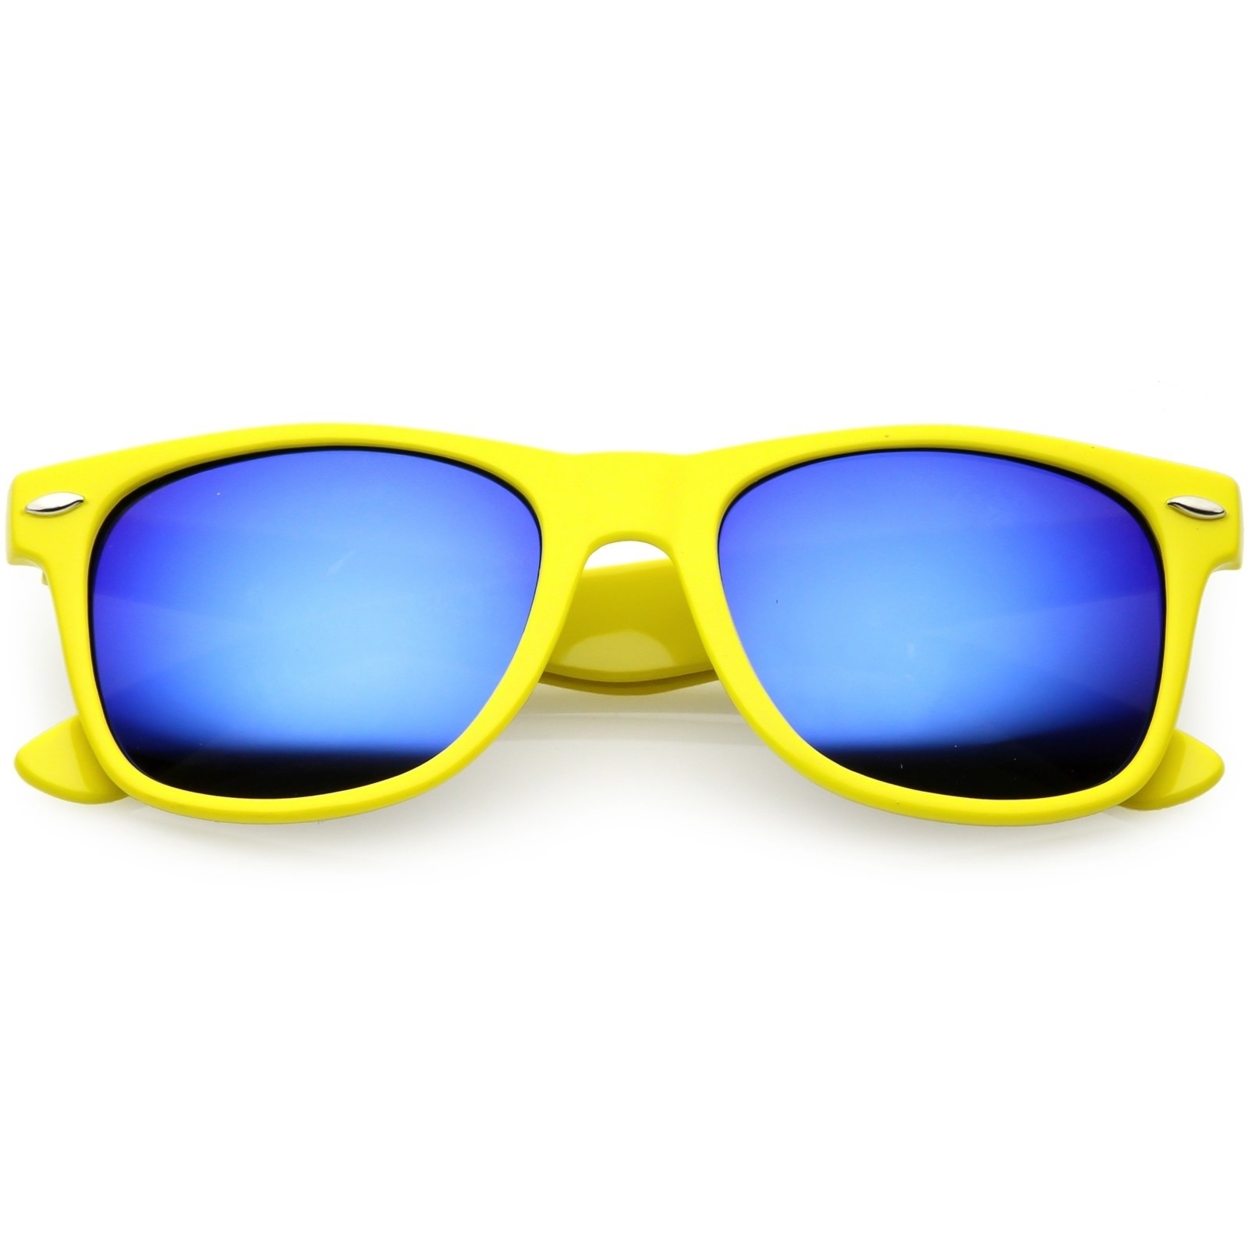 Modern Horn Rimmed Sunglasses Wide Arms Colored Mirror Square Lens 52mm - Yellow / Blue Mirror